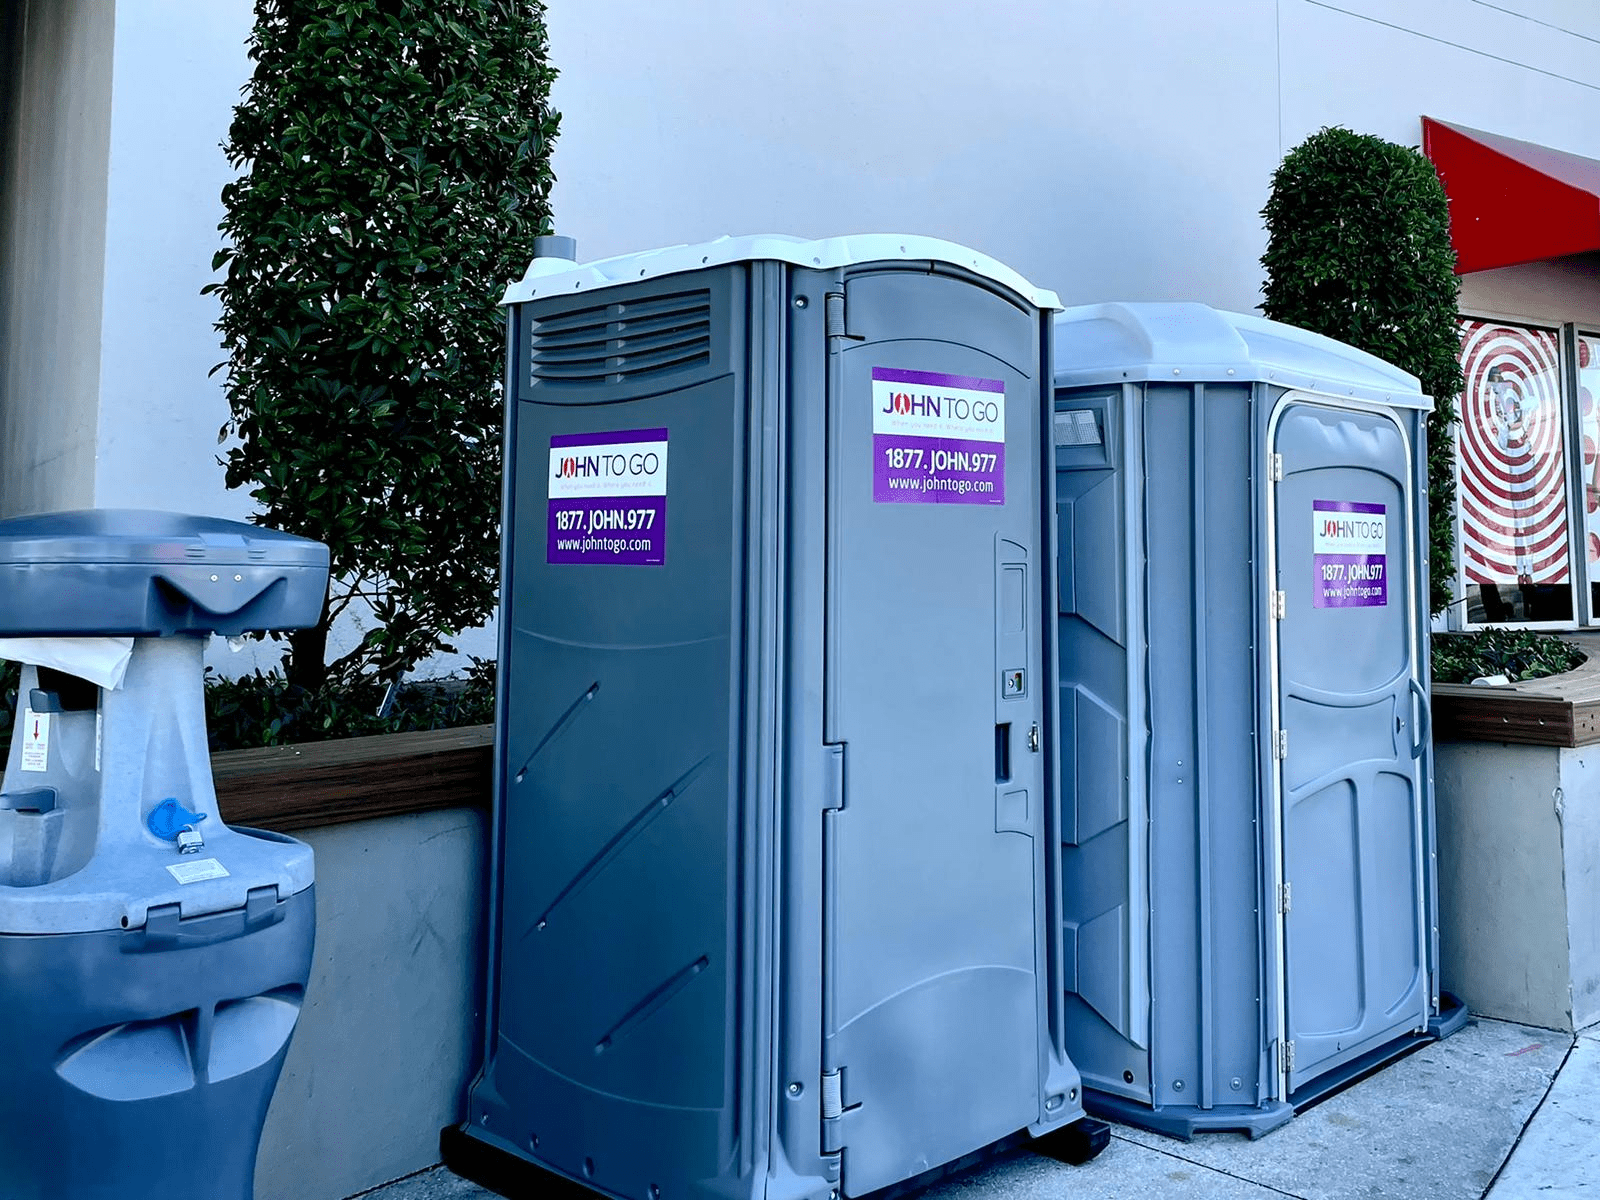 Portable handwashing station with portable toilets at an outdoor event